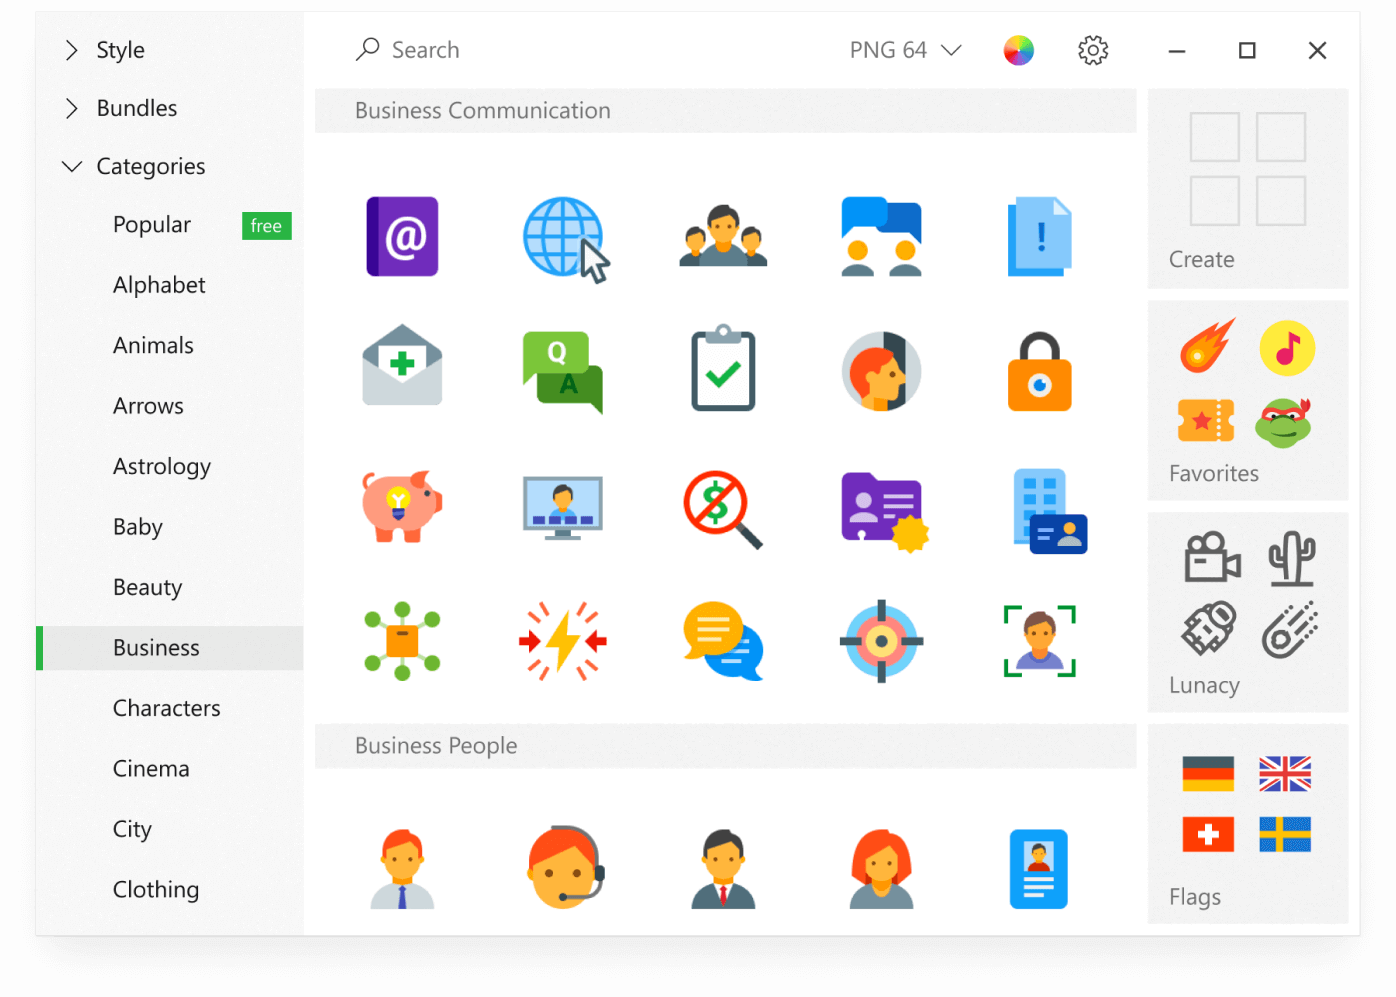 Contains 135k free icons. Works offline. A must for any design work.